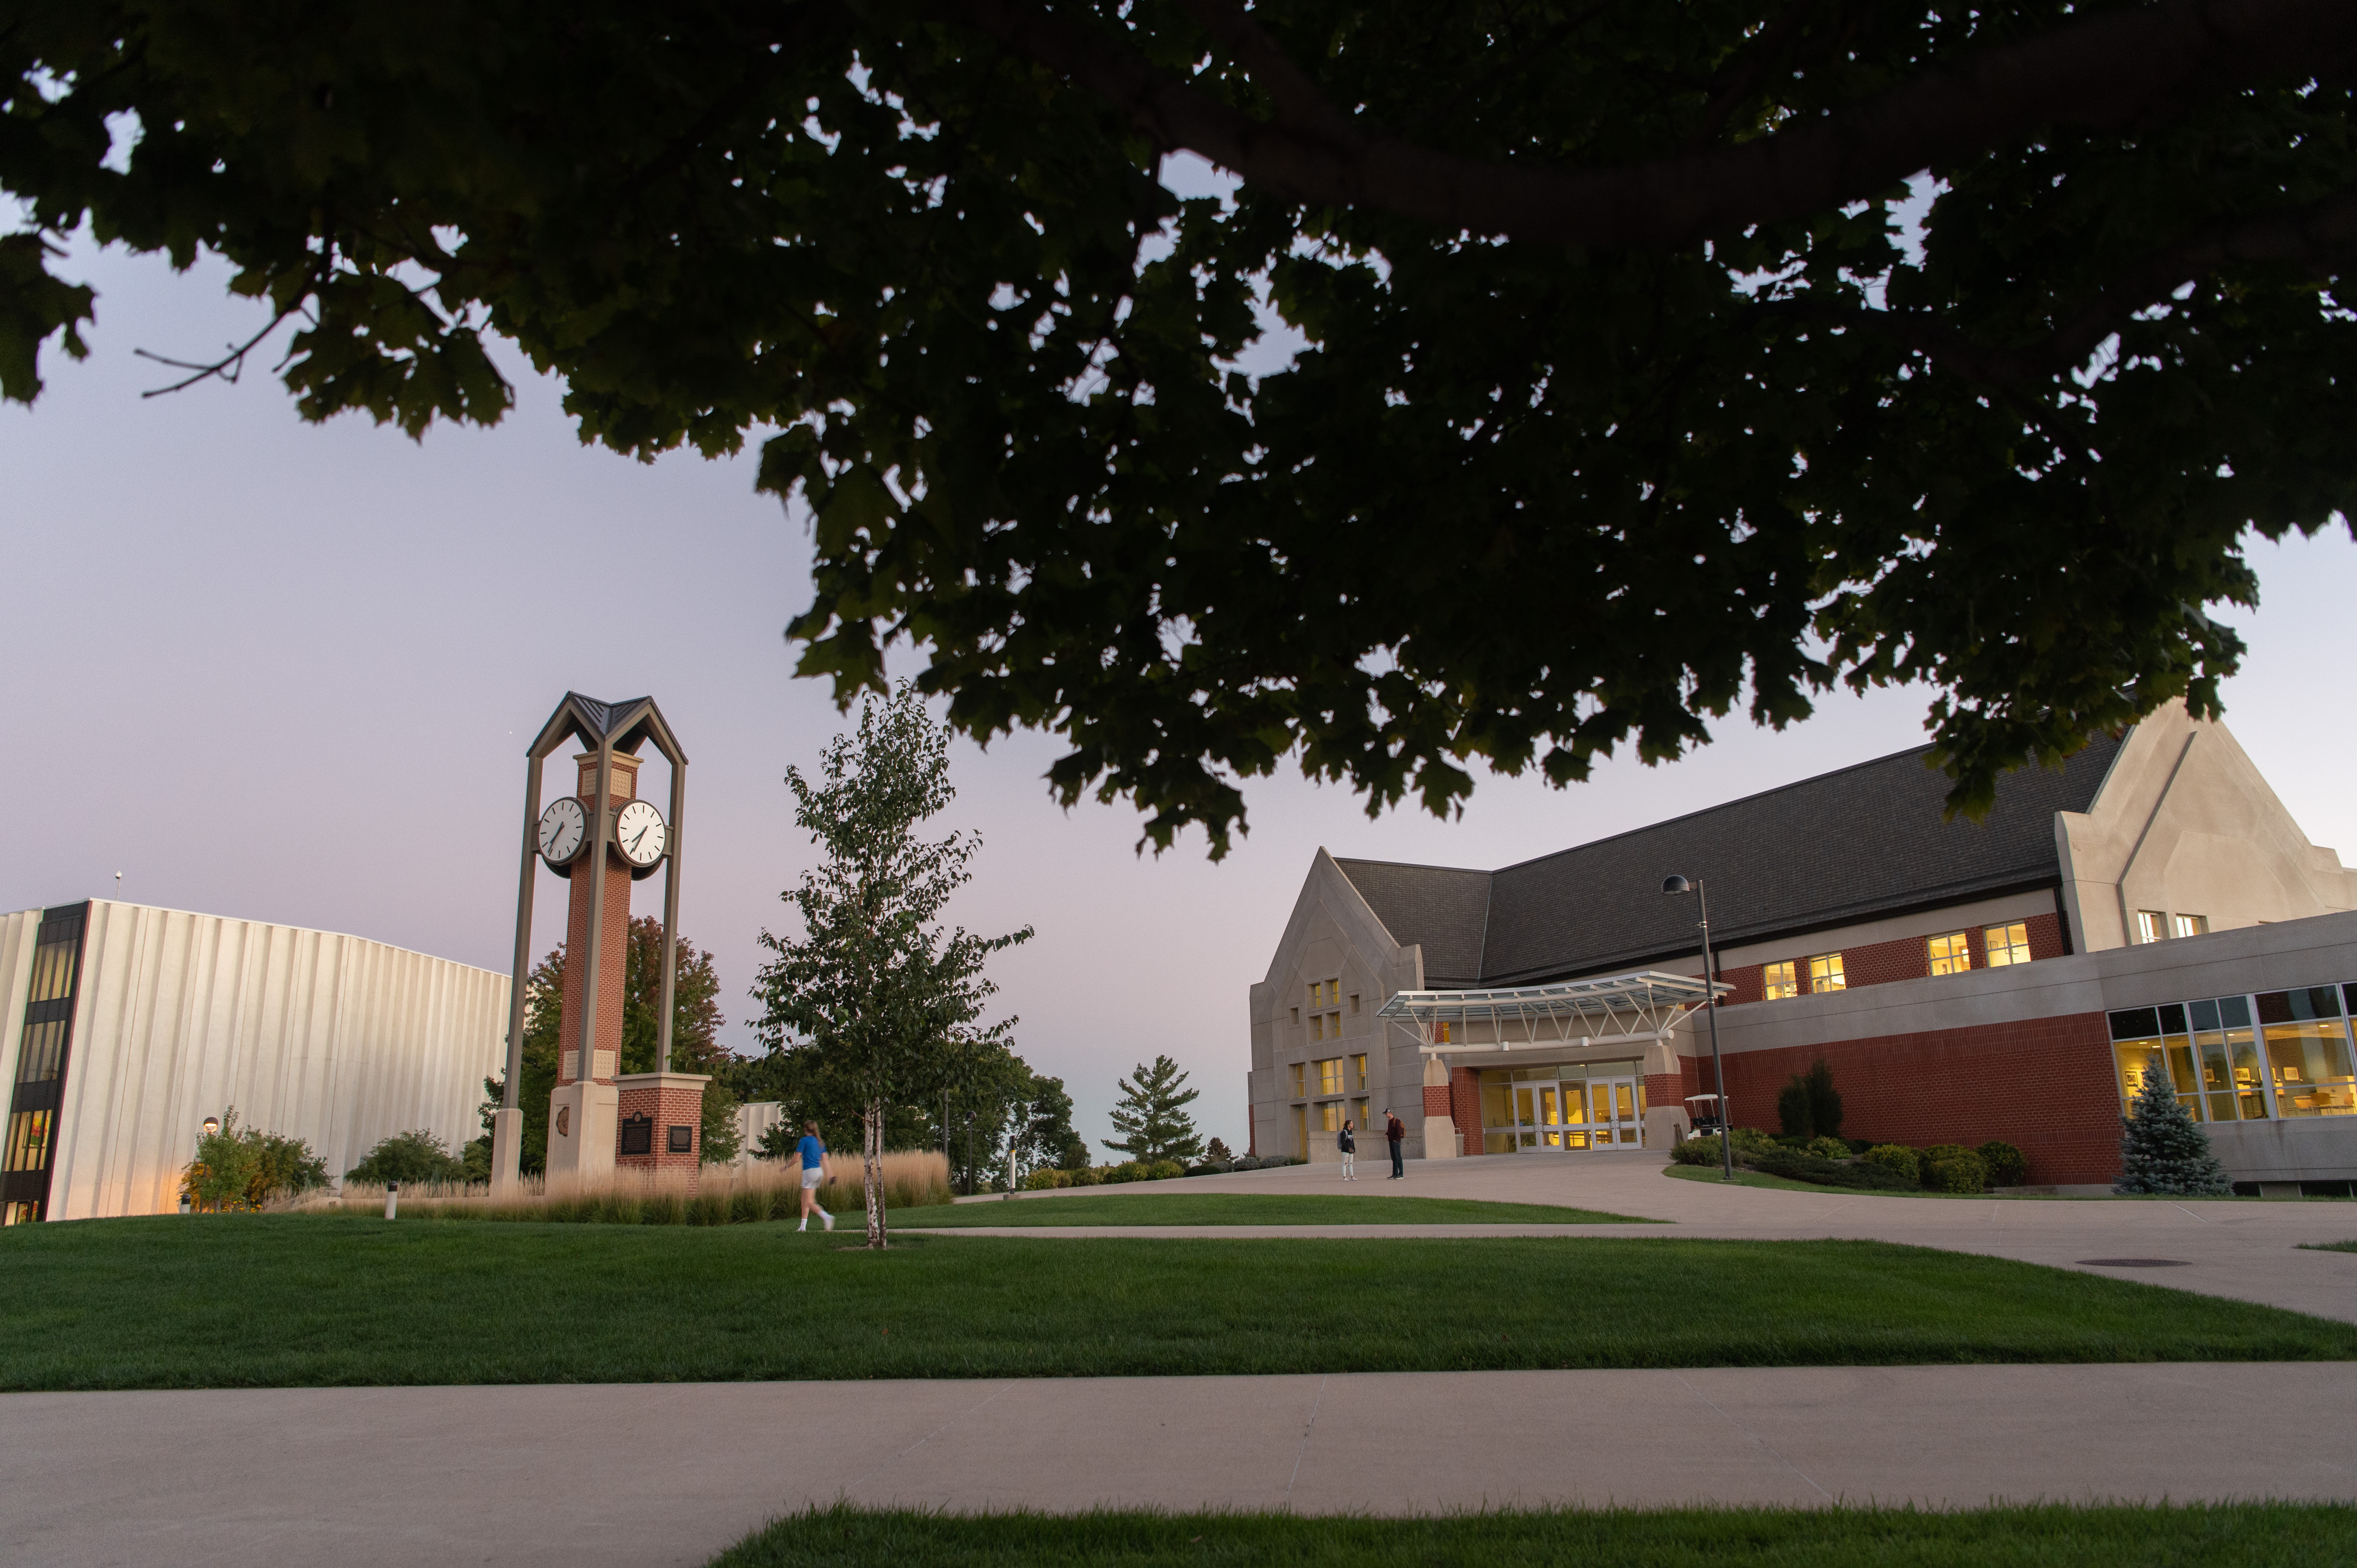 The Campus Center building and clocktower at dusk with overhanging tree in the top foreground